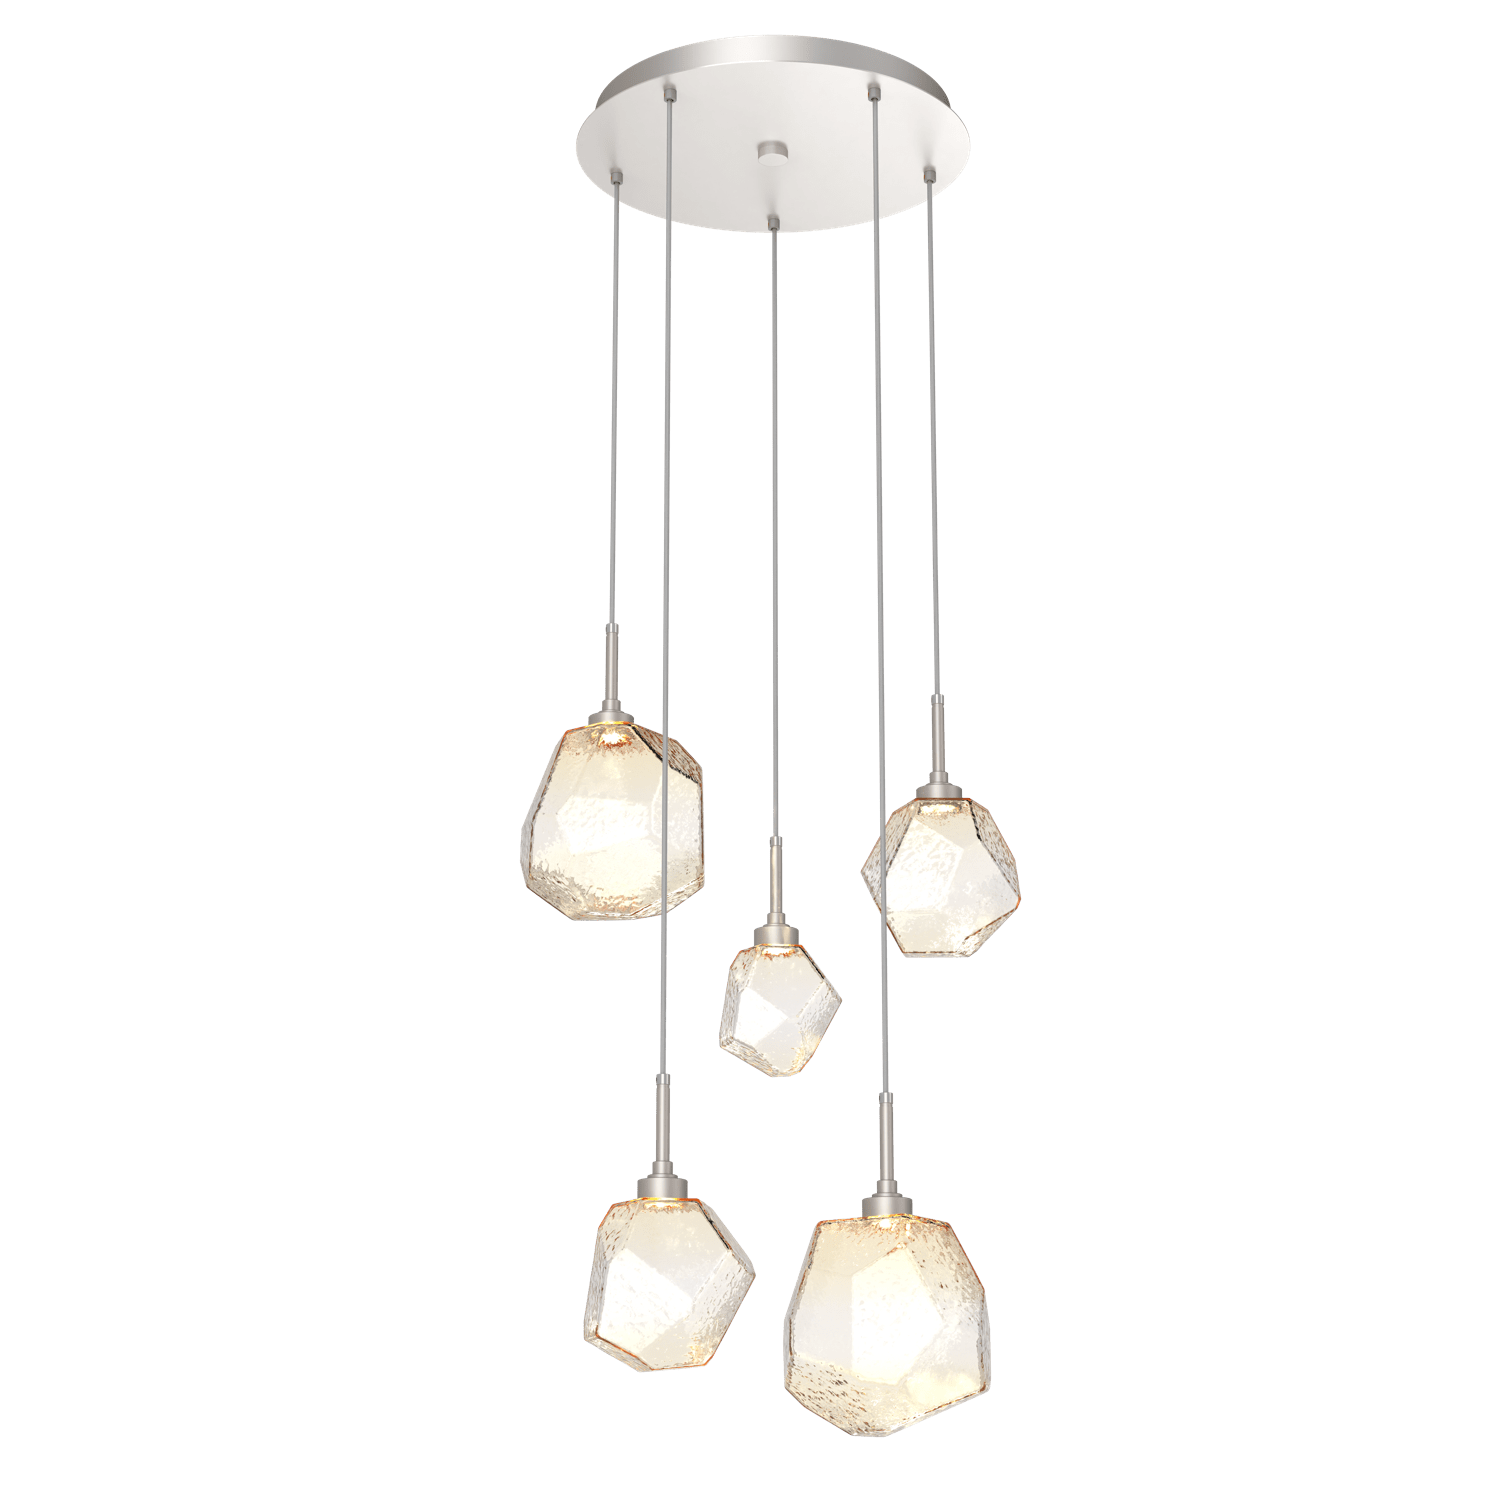 CHB0039-05-BS-A-Hammerton-Studio-Gem-5-light-round-pendant-chandelier-with-metallic-beige-silver-finish-and-amber-blown-glass-shades-and-LED-lamping